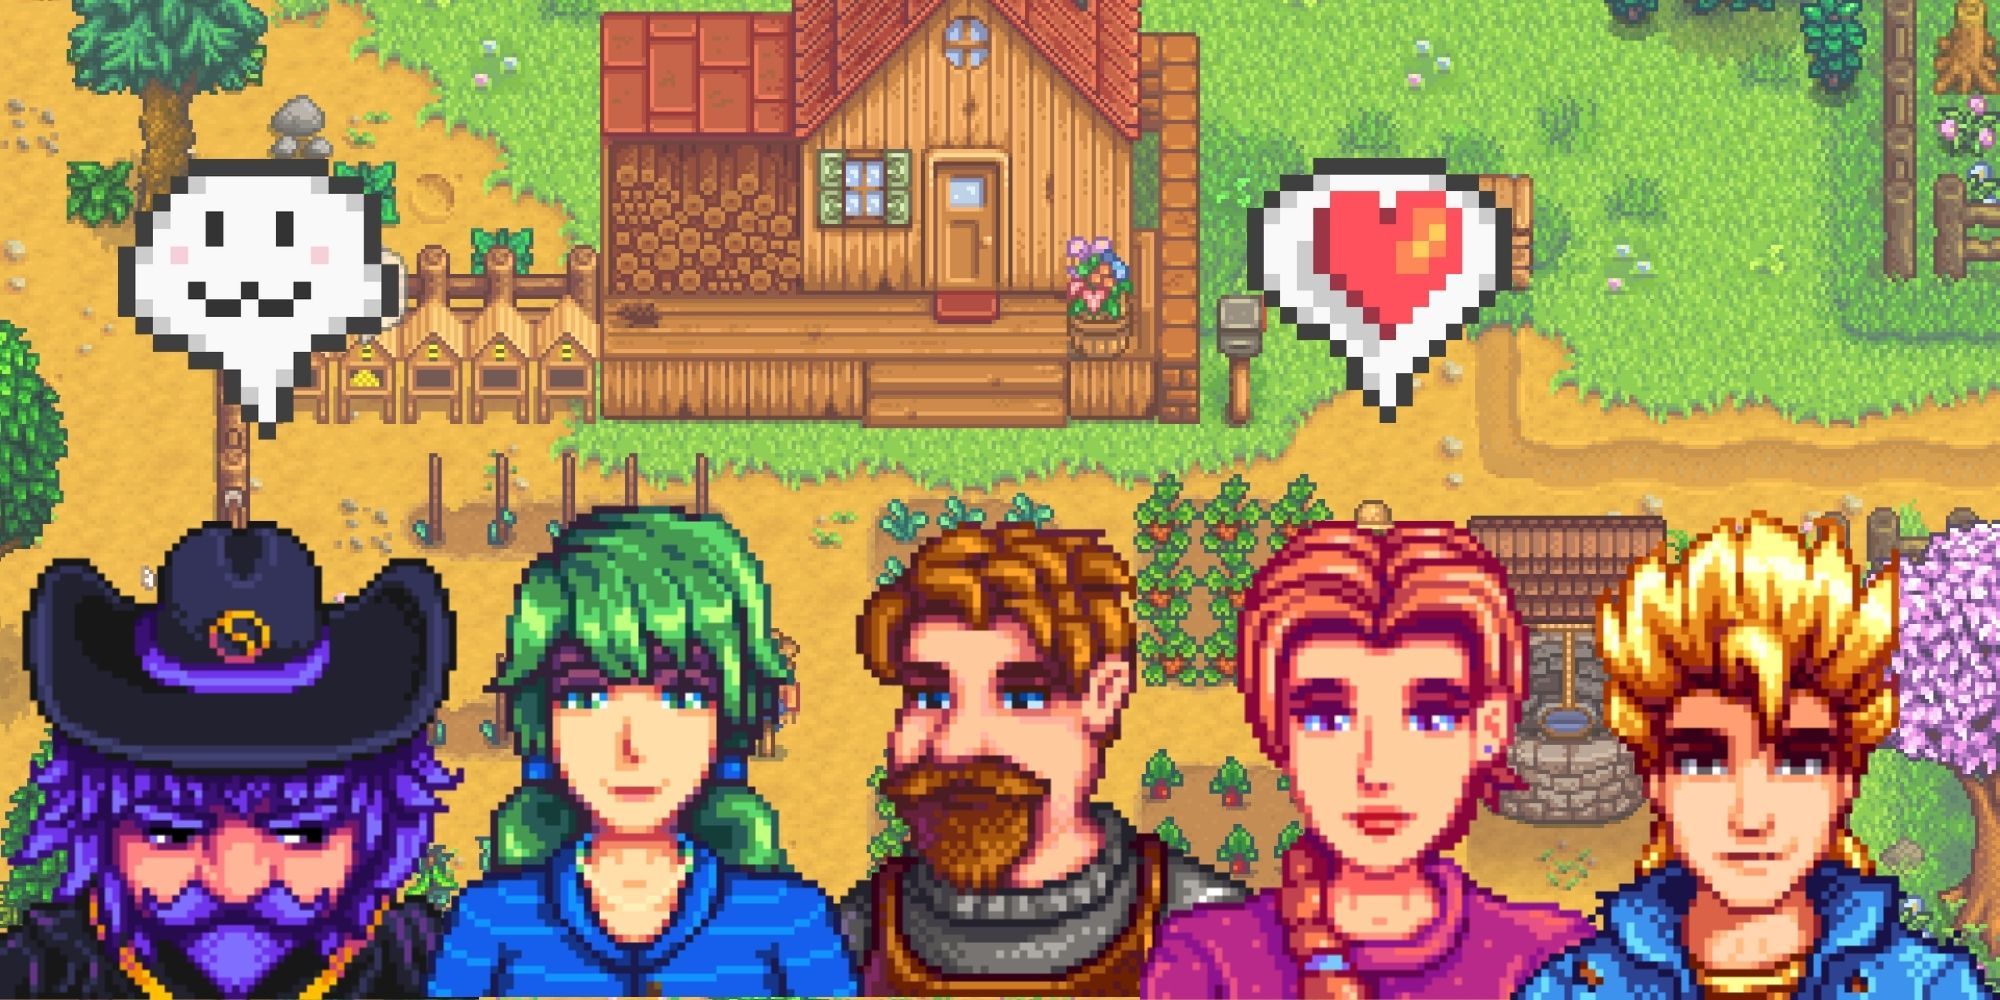 Re:Legend's mix of Monster Rancher and Stardew Valley has a publisher: 505  Games